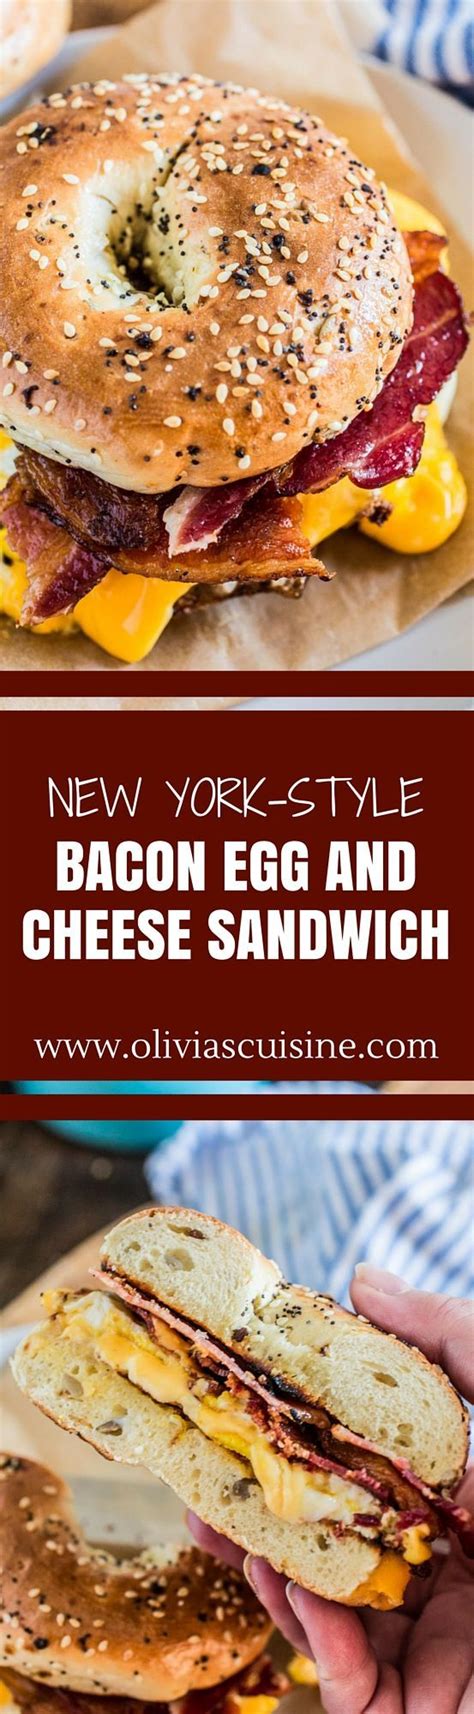 New York Style Bacon Egg And Cheese Sandwich Recipe